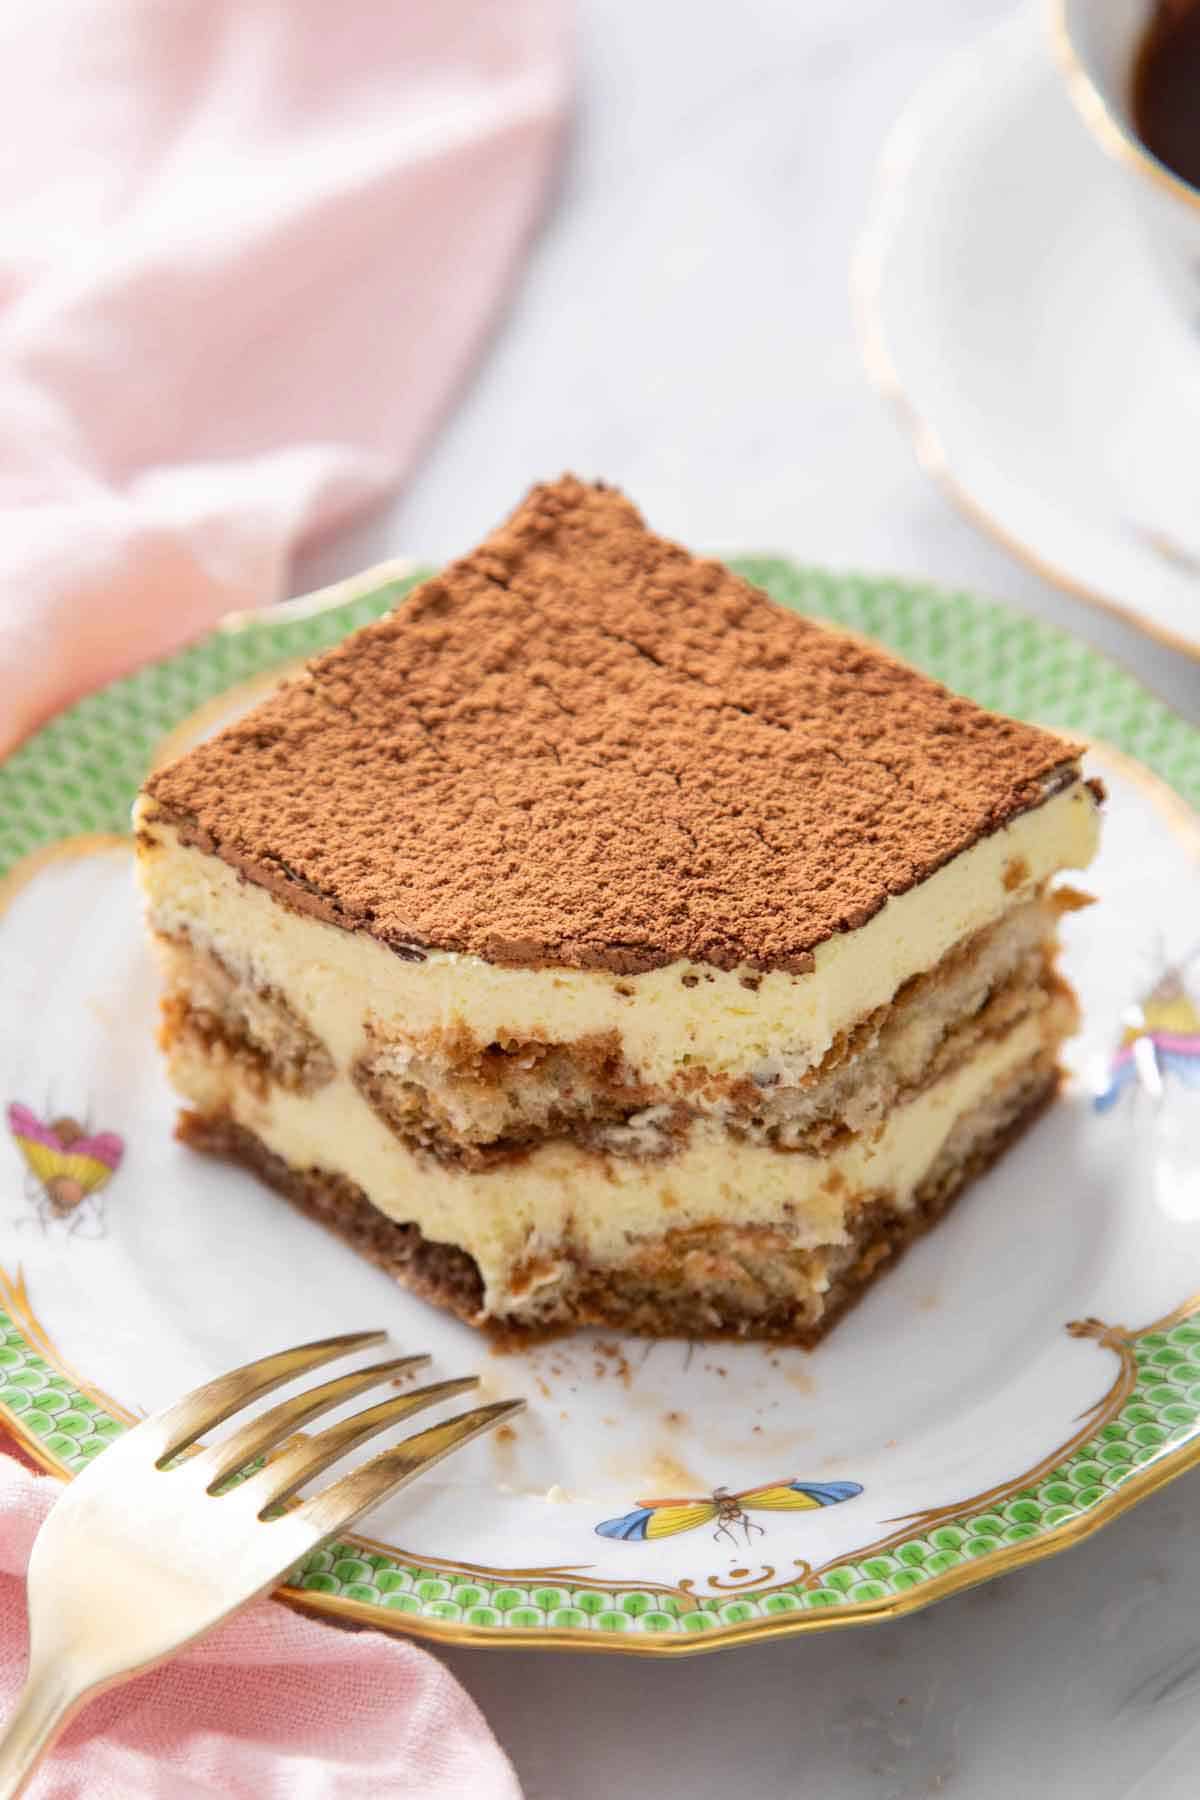 A slice of tiramisu on a plate with a bite taken out and a fork beside it.